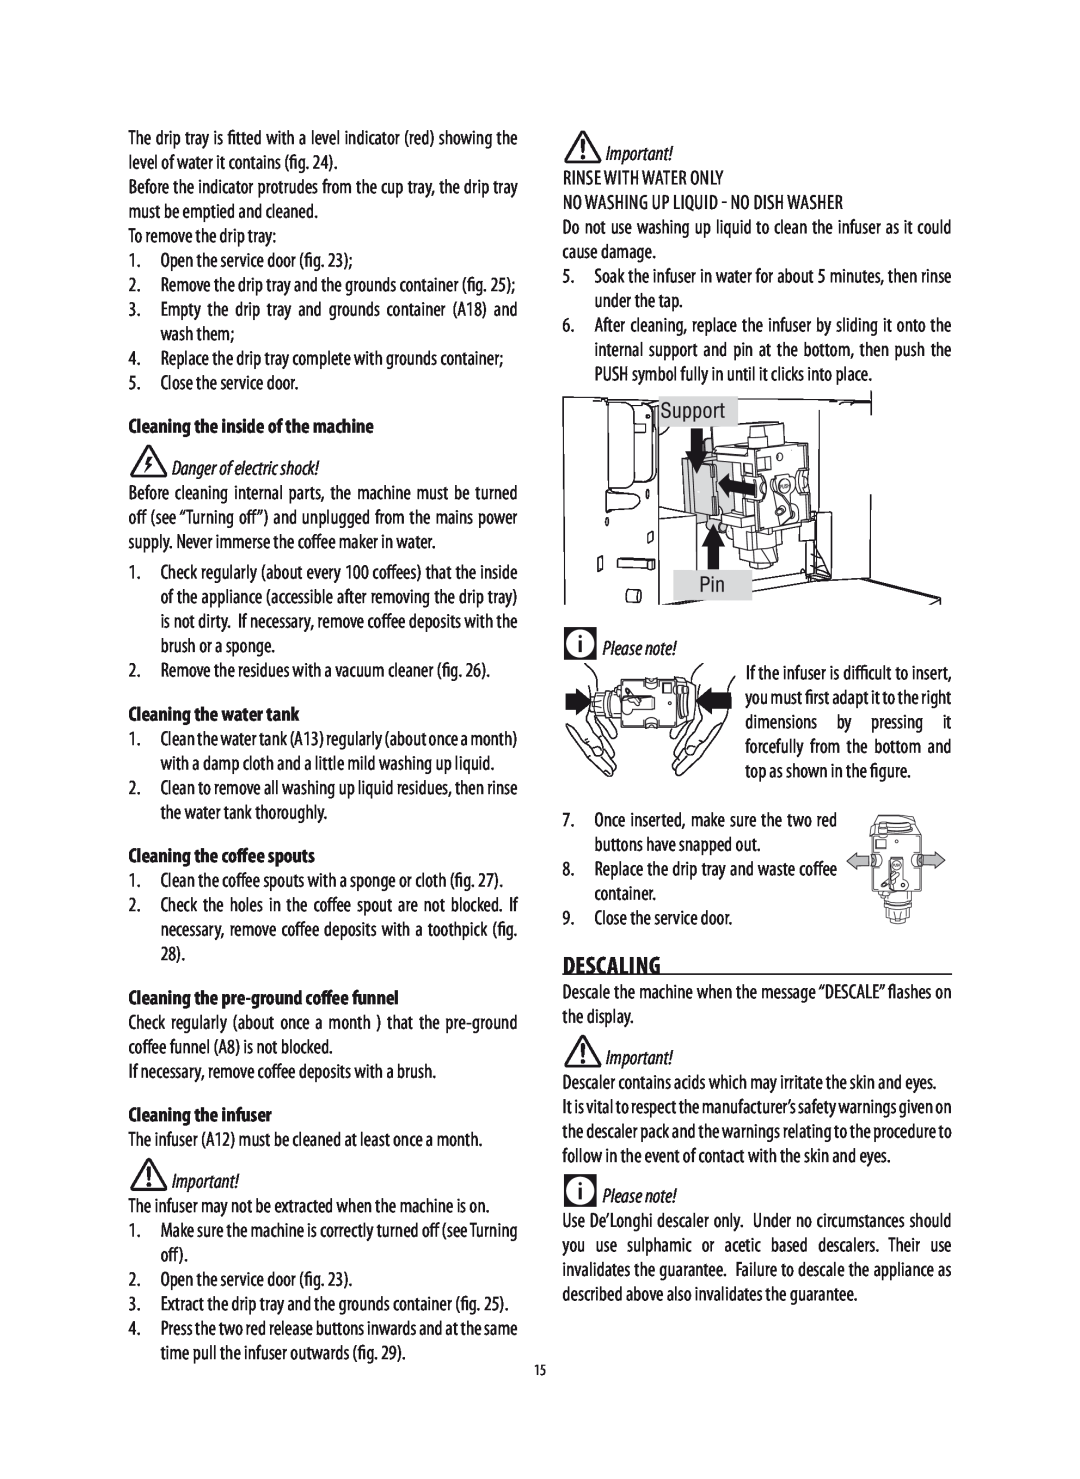 DeLonghi 5713214281 manual Descaling, Cleaning the inside of the machine, Danger of electric shock, Cleaning the water tank 